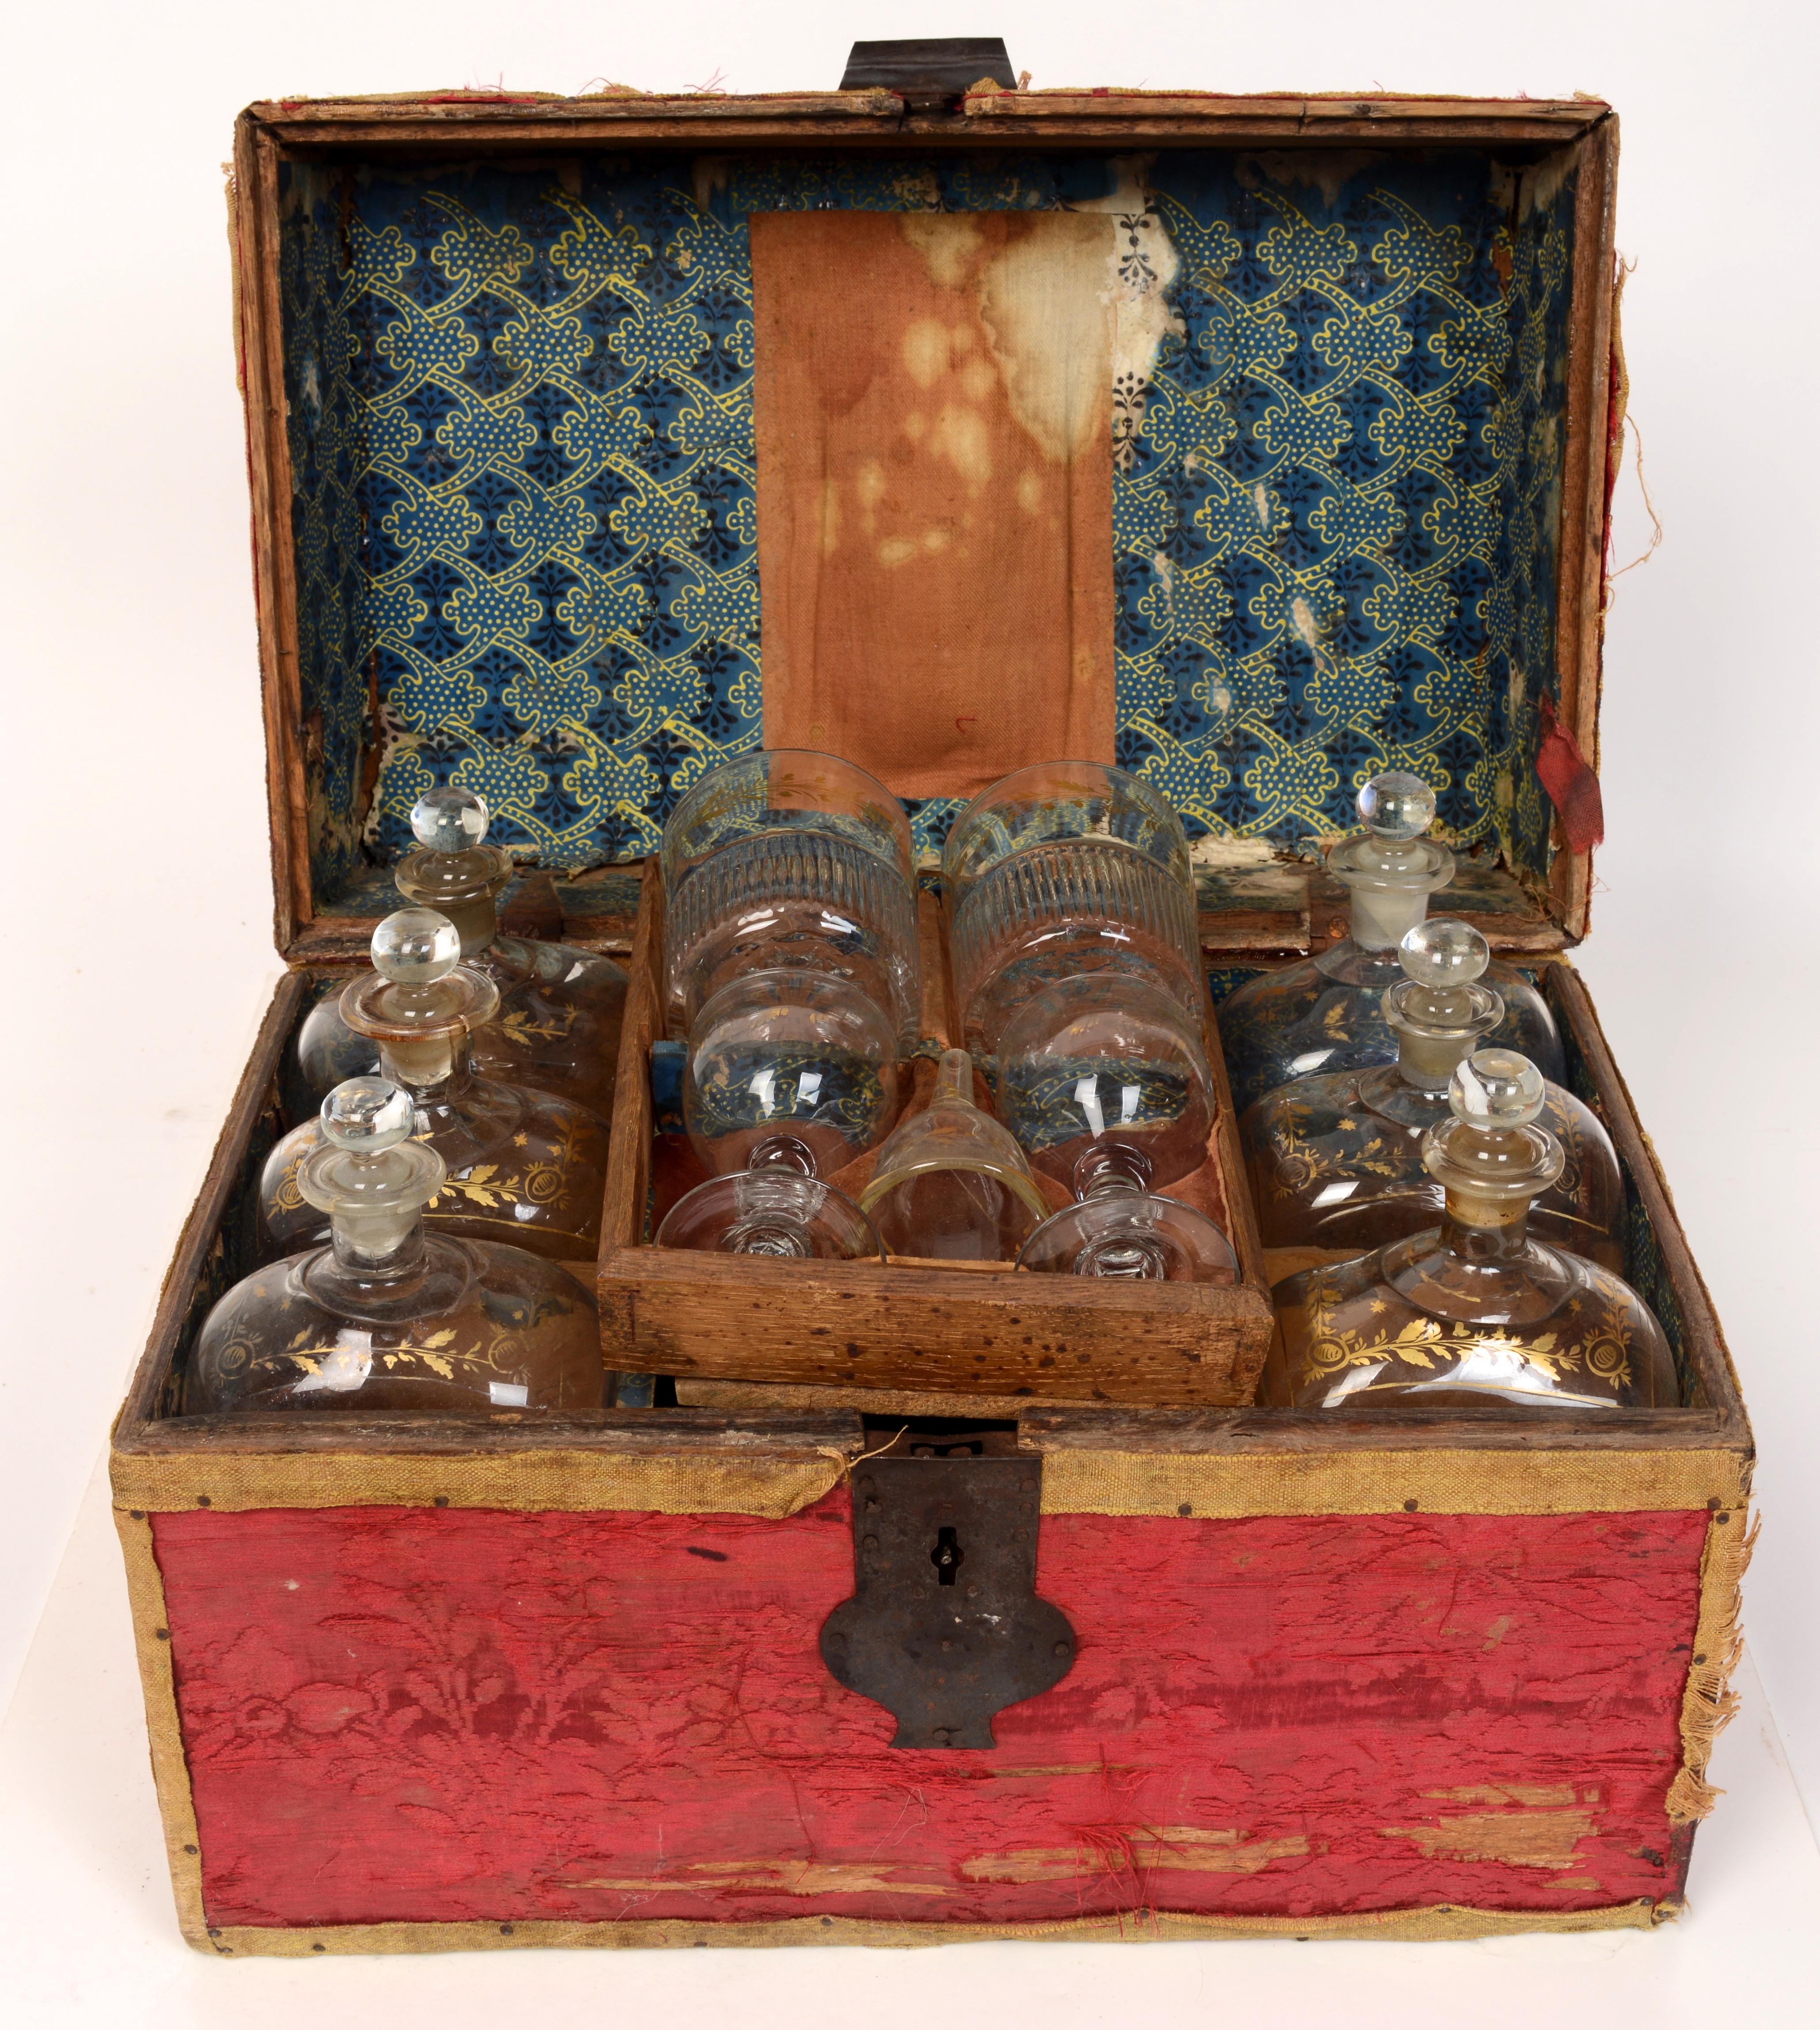 Fitted traveling case with original hand blown gilt decorated bottles with the original crimson brocade cover, late 18th century. The case retains the original working lock and key on a braided 18th century cord with tassels. 